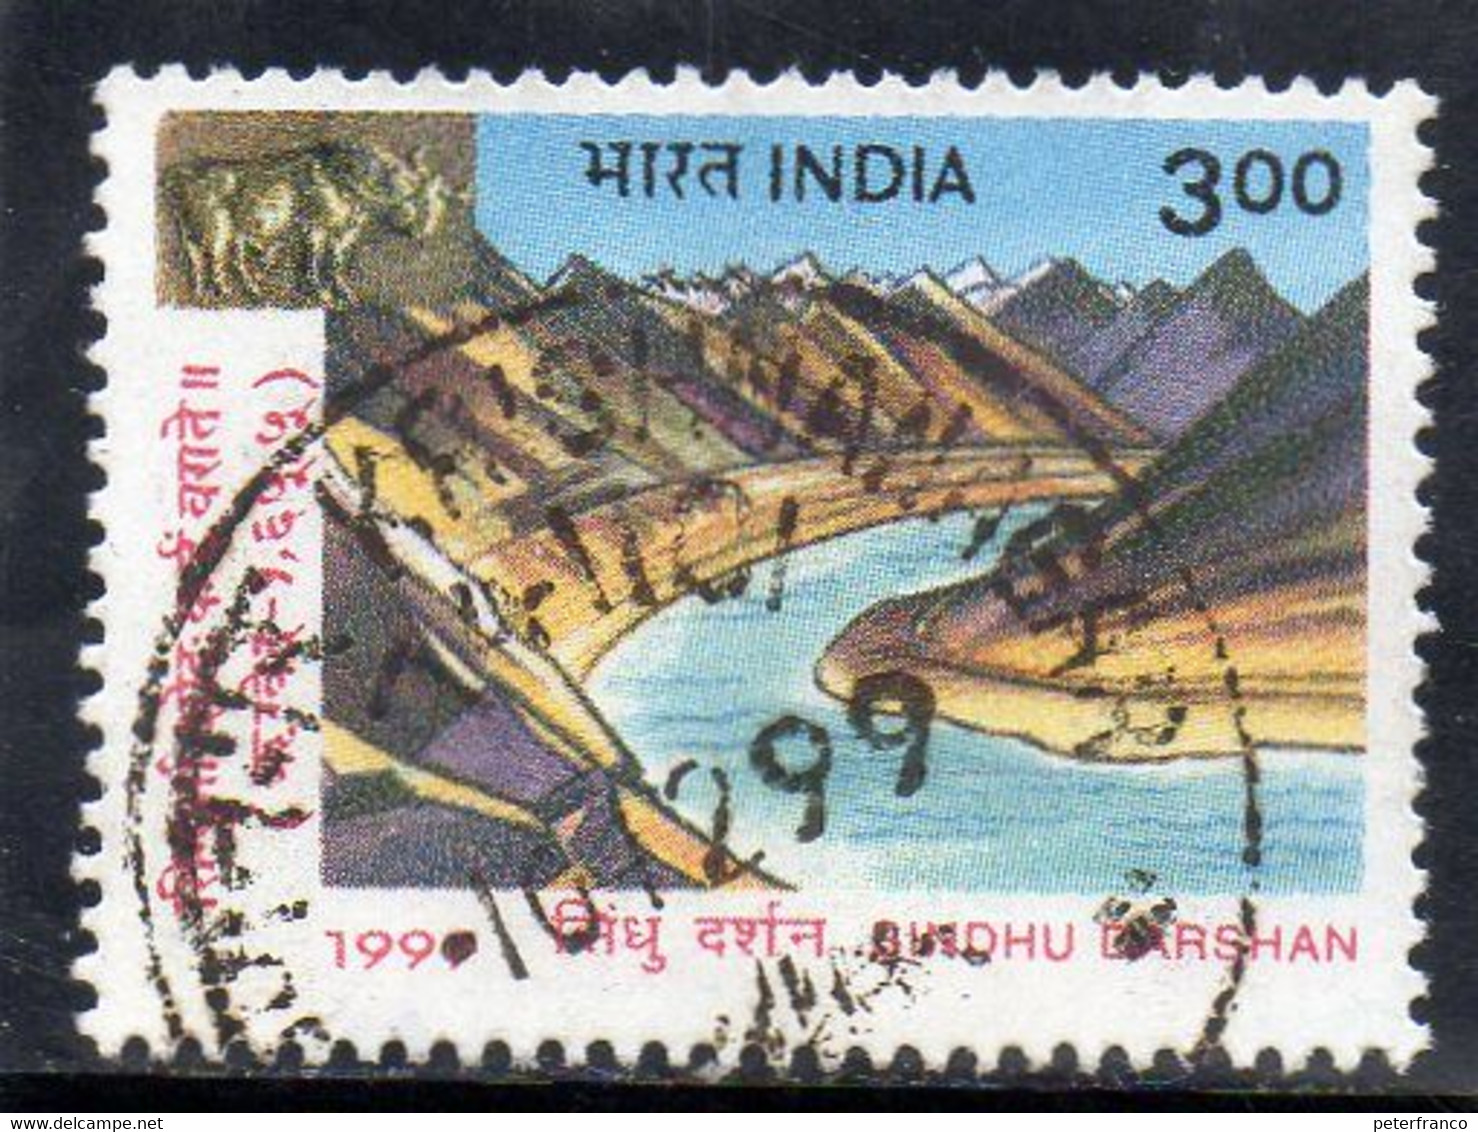 1999 India - Sindhu Darshan Festival - Used Stamps